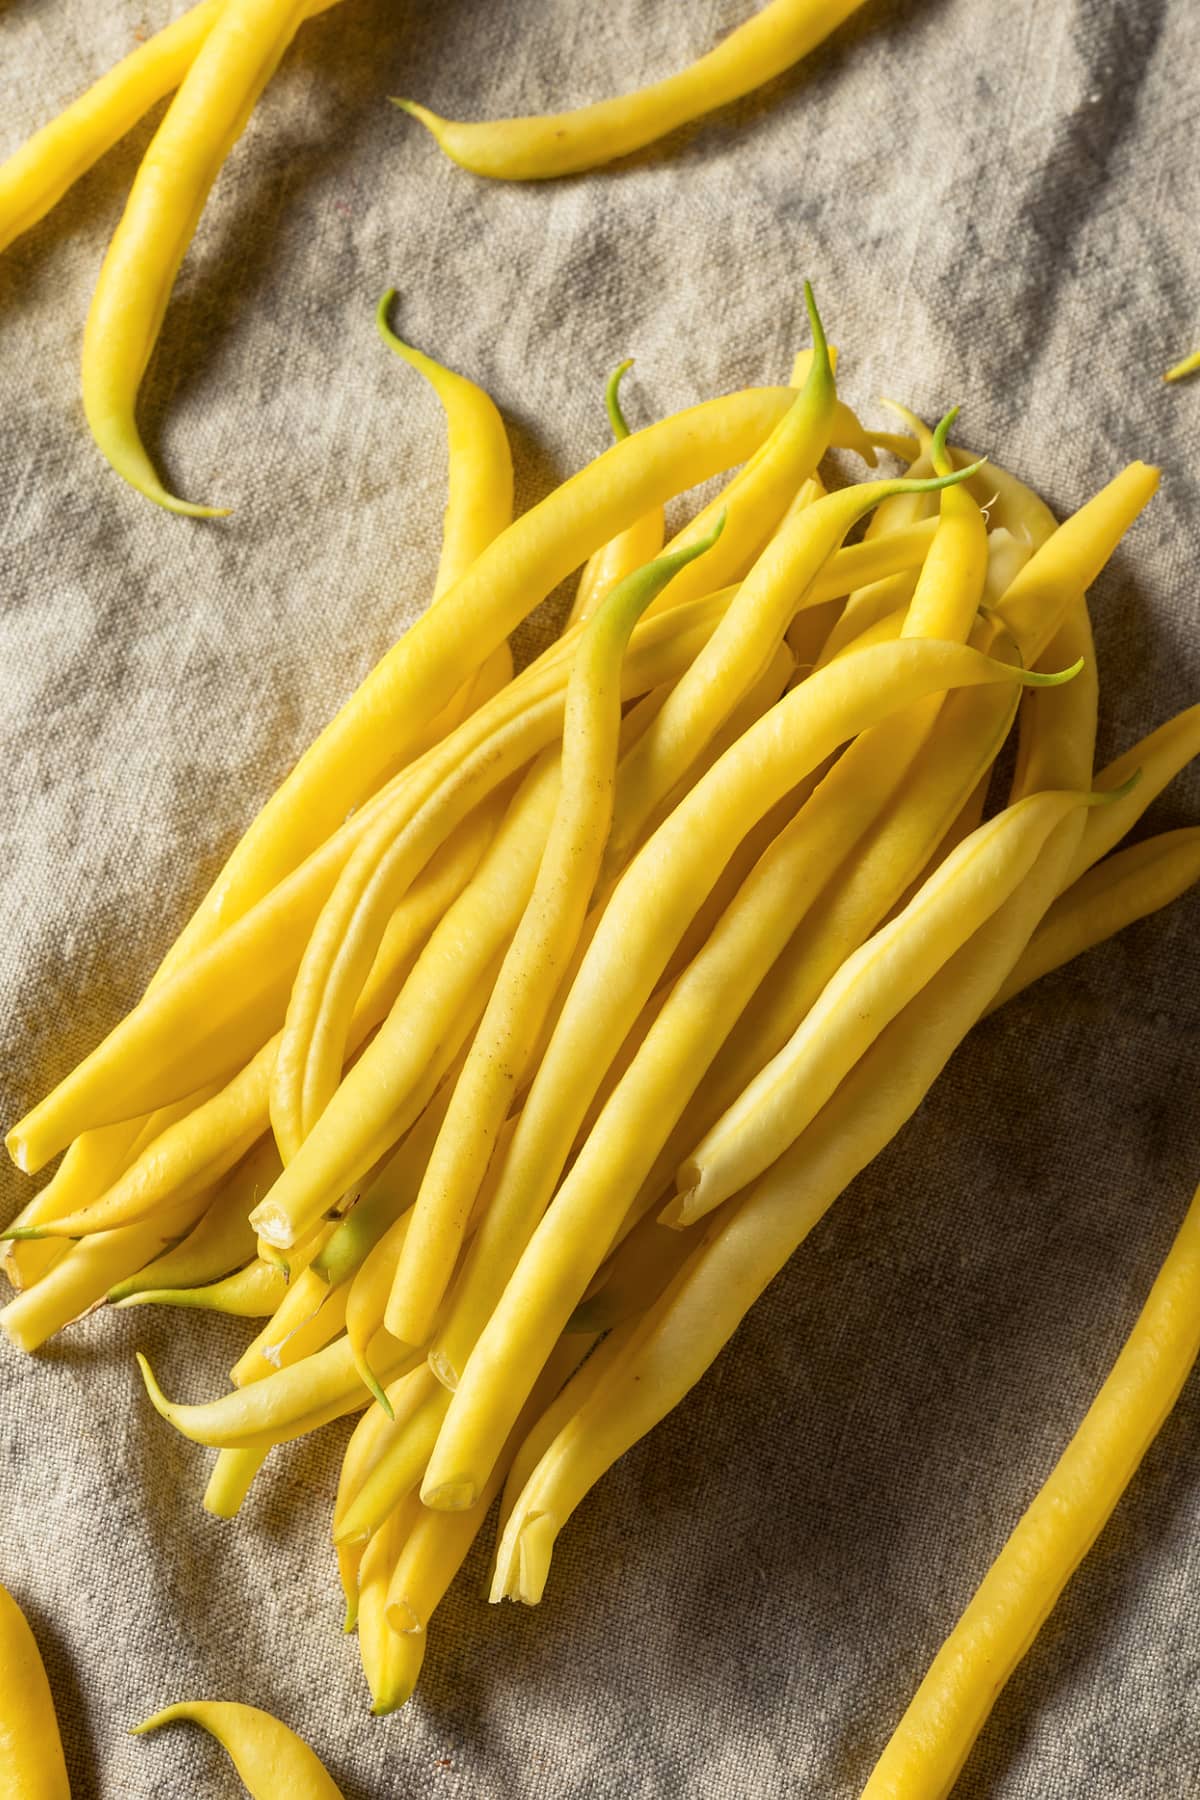 What Are Wax Beans?